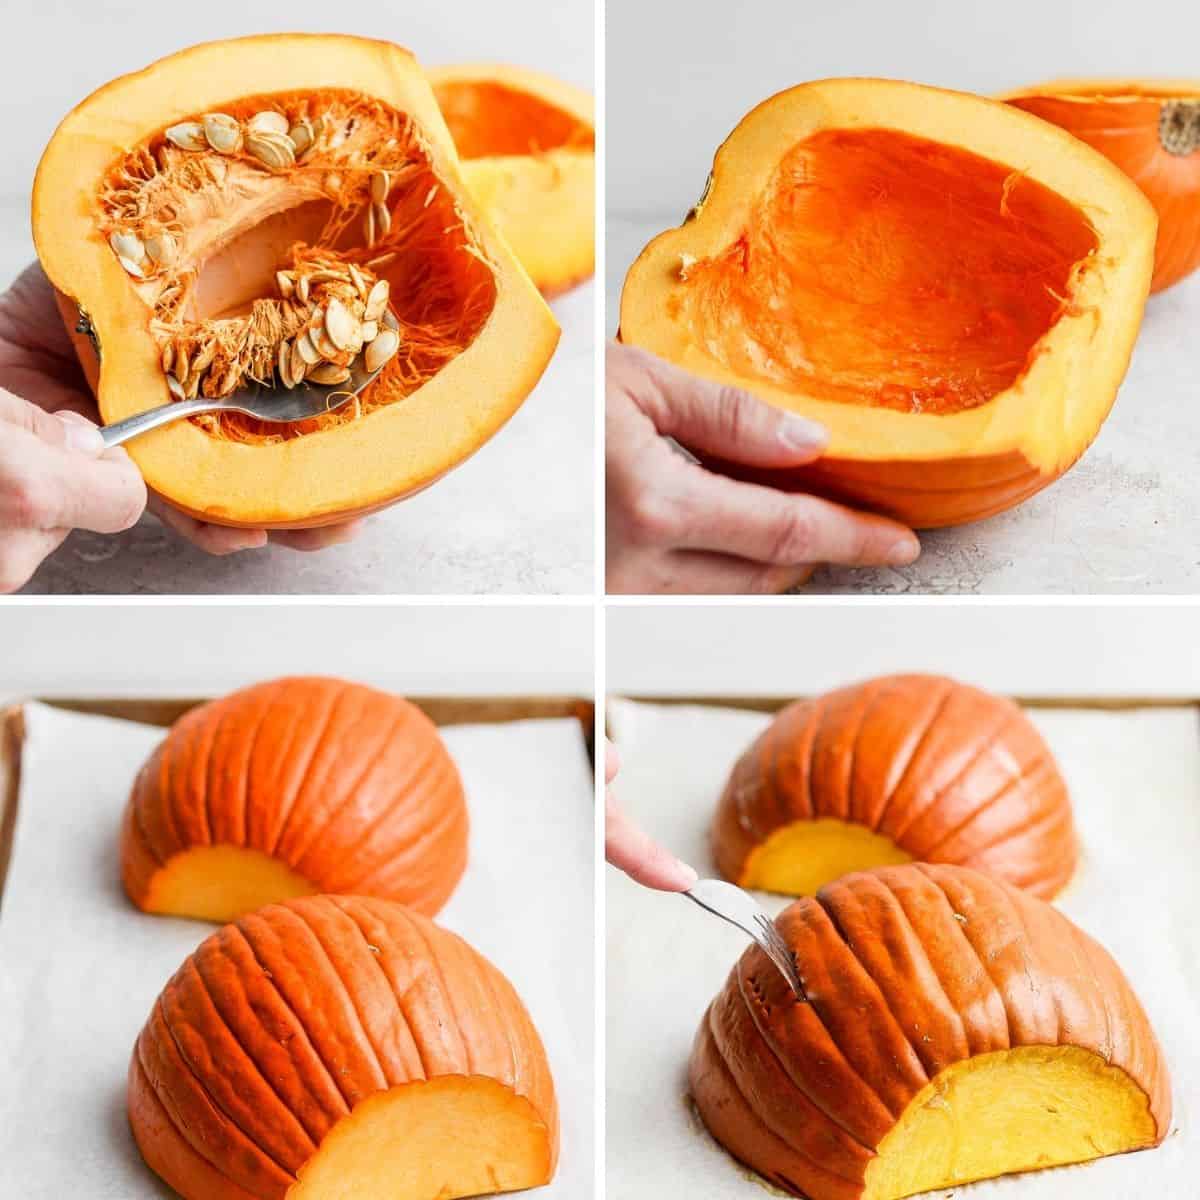 4 image collage to show how to clean the pumpkin seeds from a small pumpkin and then roast it